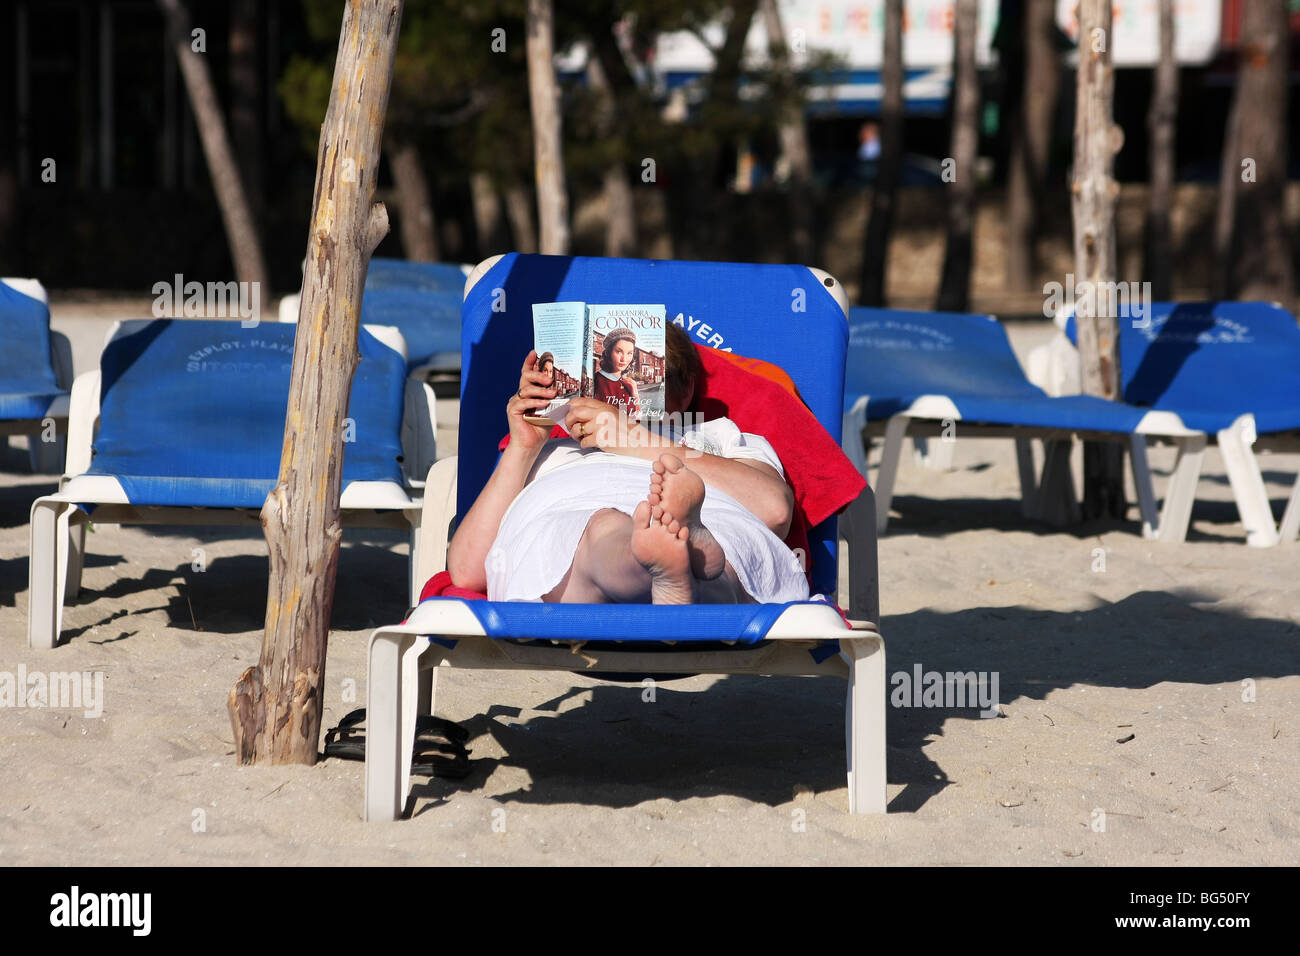 Lady relaxing in the sun on a beach lounger reading a book. Stock Photo